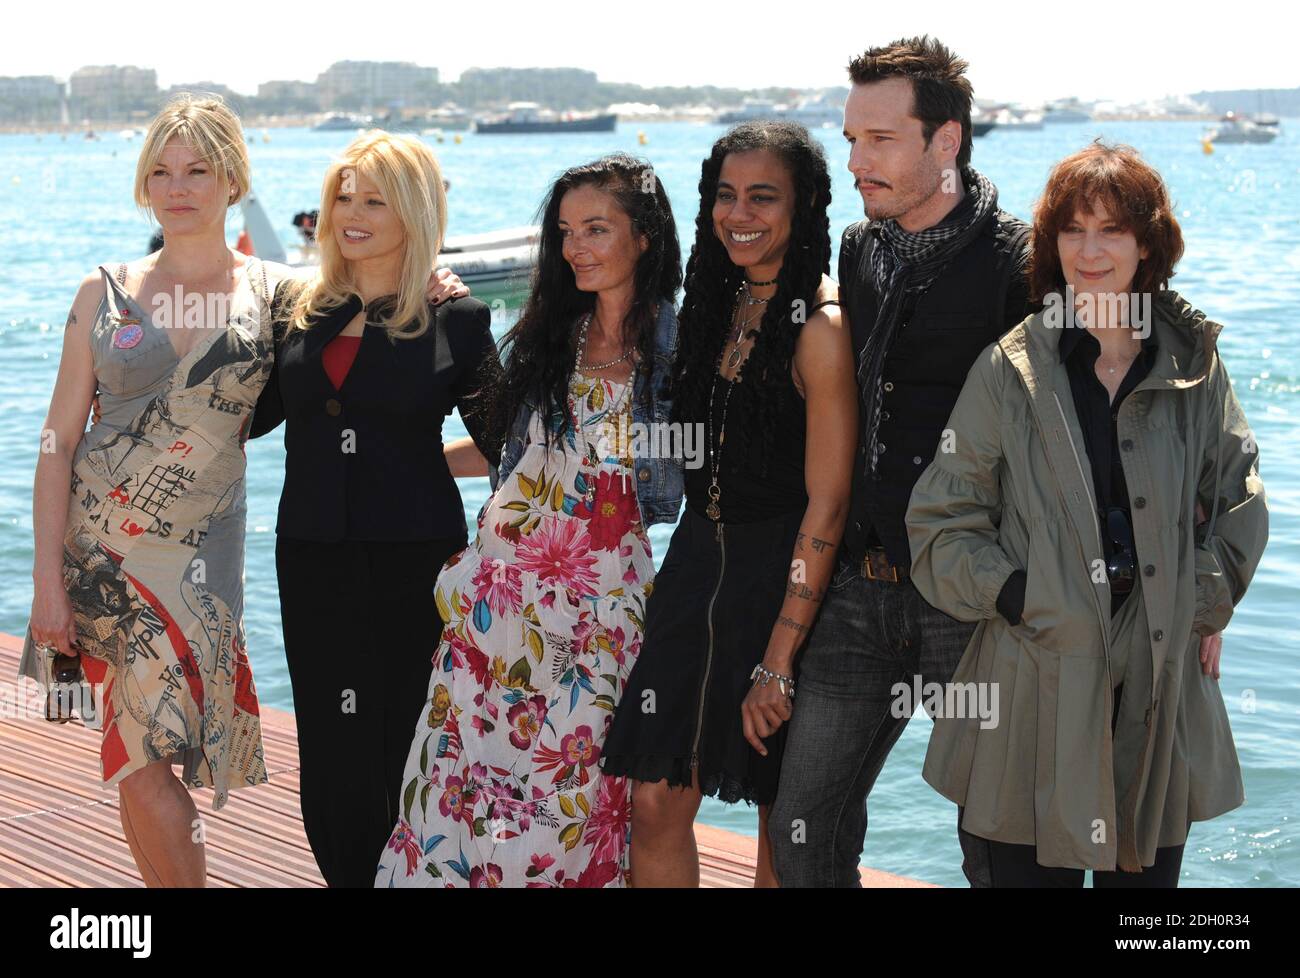 (L-R) Sara Stockbridge, Donna Derrico, Mary McGuckian, Suzan-Lori Parks, Michael Eklund and Amanda Plummer at the photocall for The Making of Plus One held at the Majestic Hotel Beach. Part of the 62nd Festival de Film, Cannes. Stock Photo